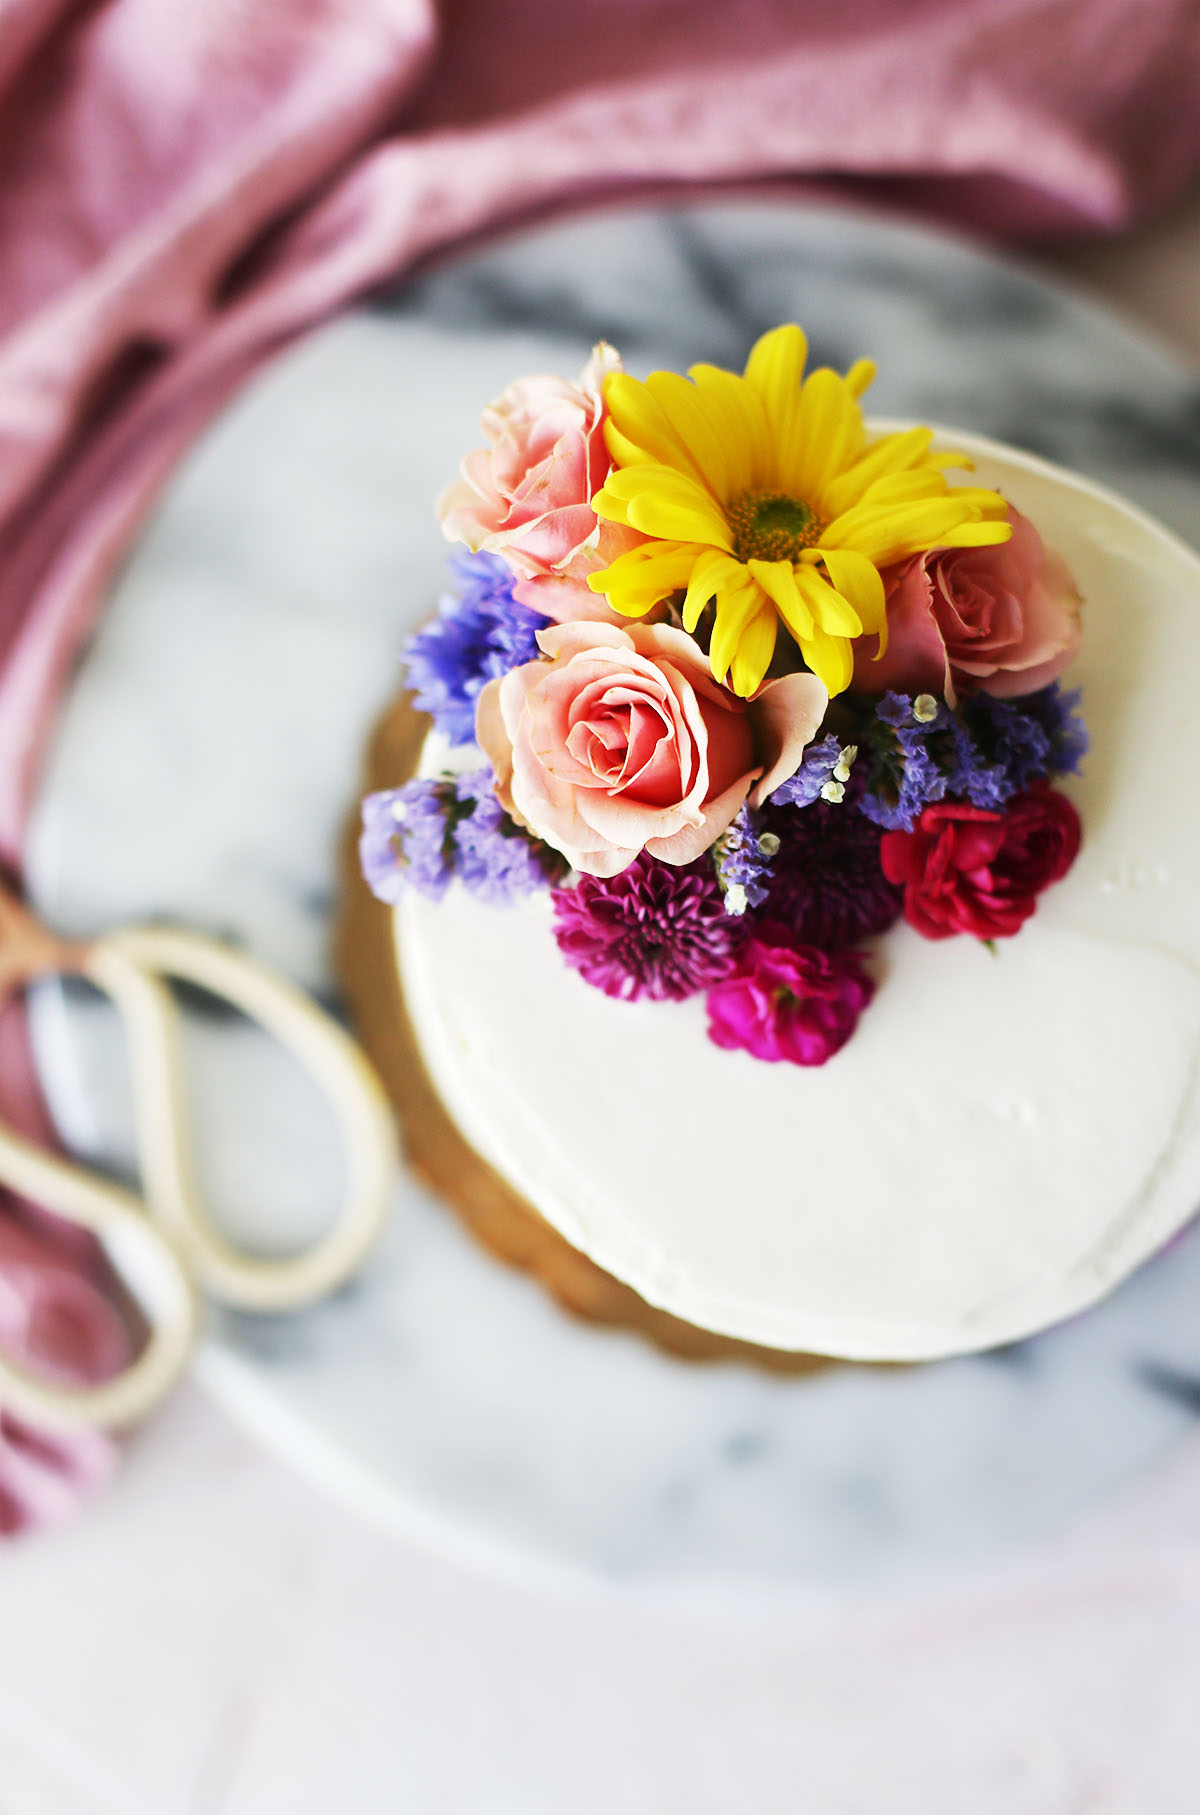 Floral Tape for Cakes, Tape for Flowers on Cake